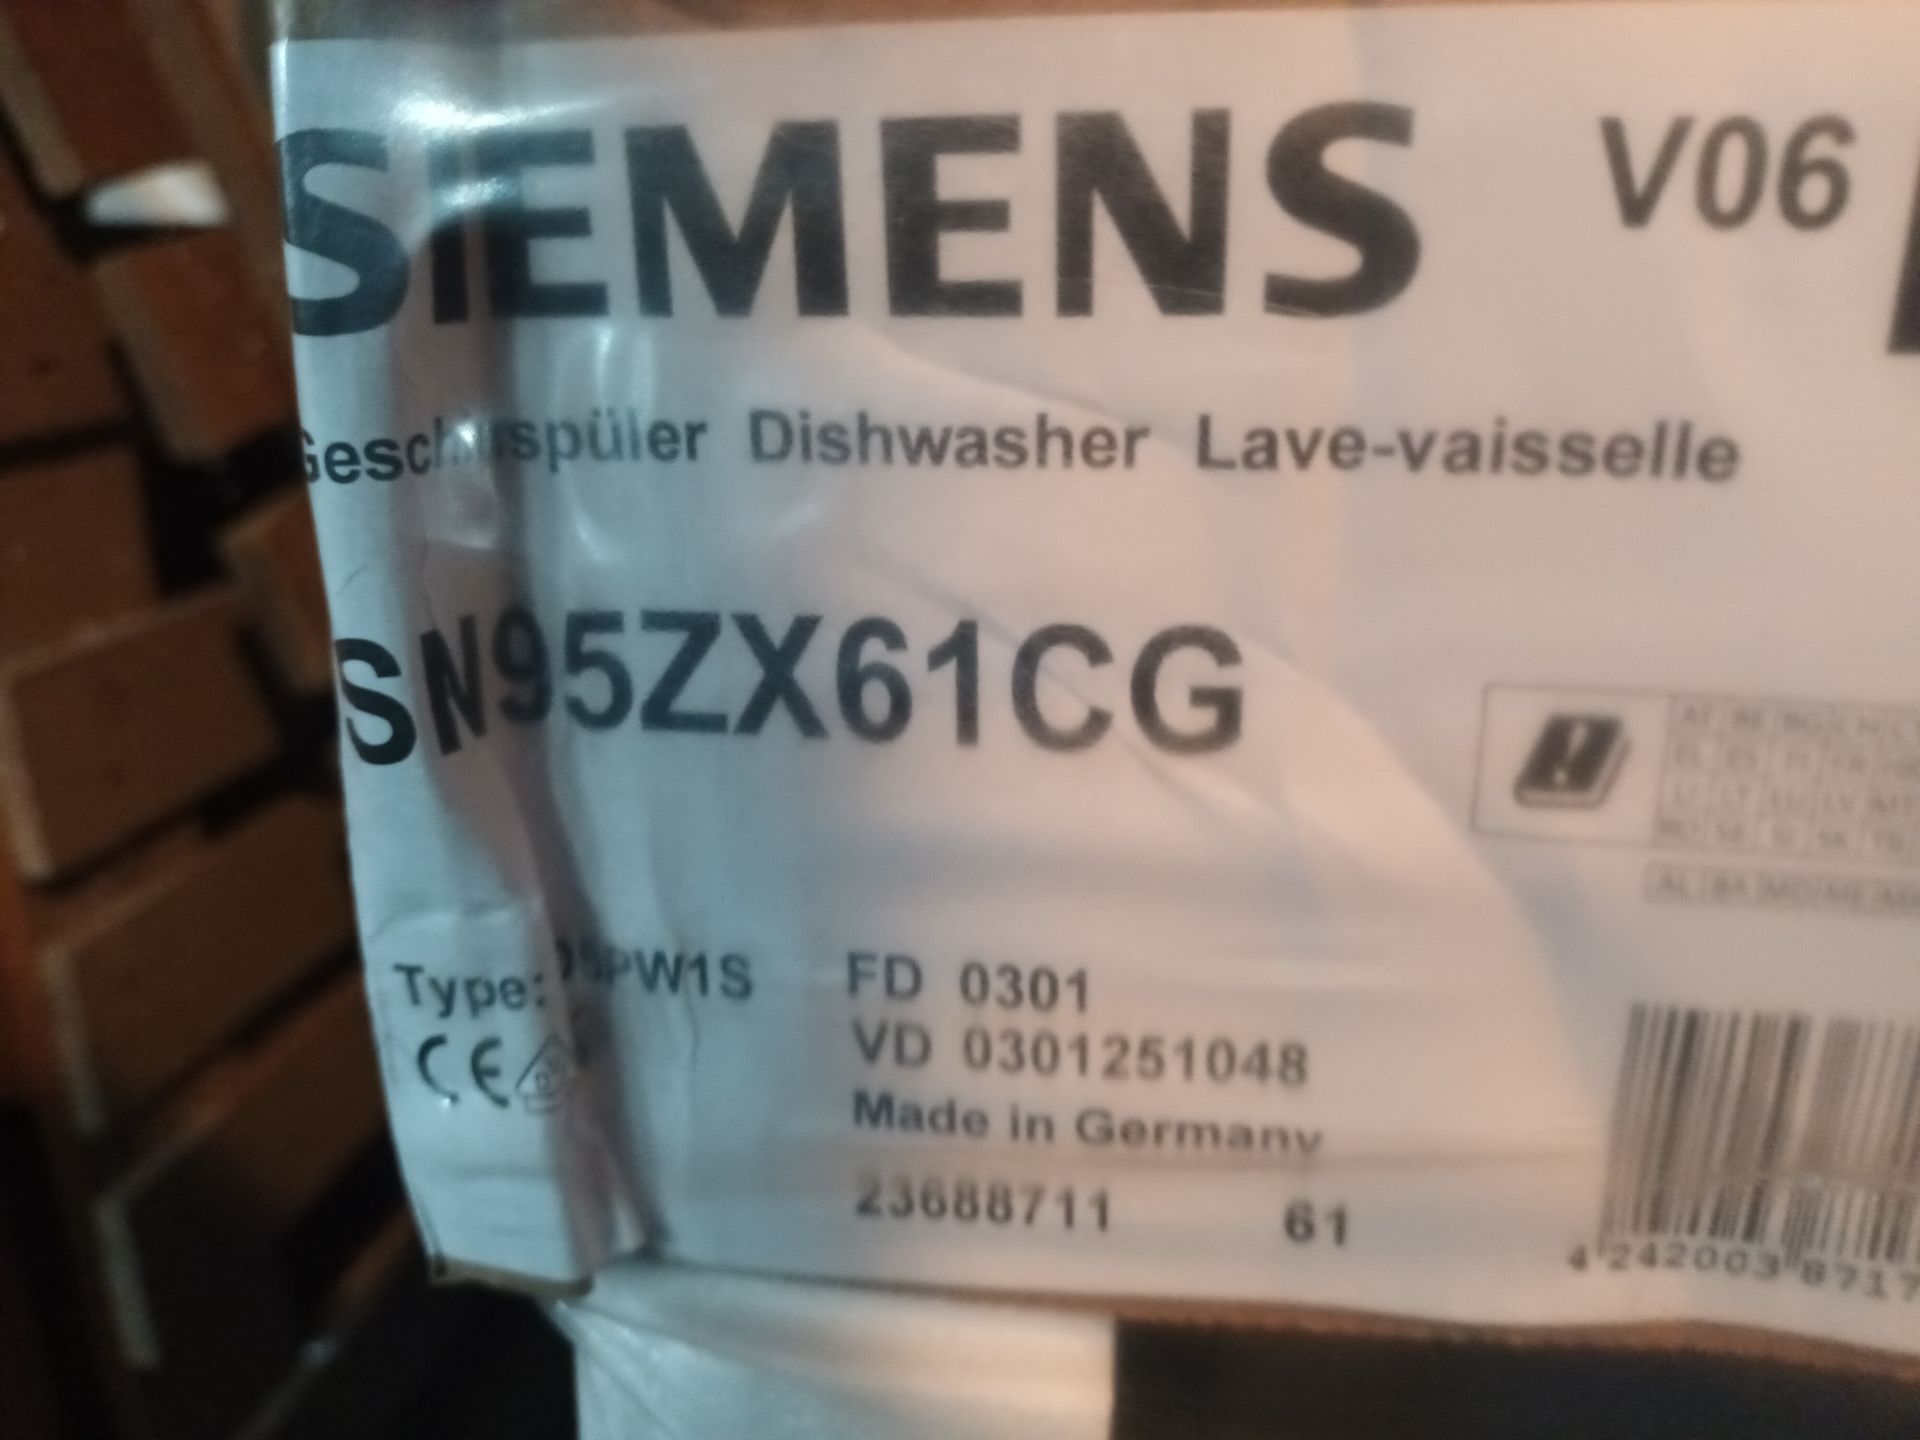 Siemens SN95ZX61CG Type SD6PW1S dishwasher (boxed & sealed) (Located: Billericay) - Image 2 of 3